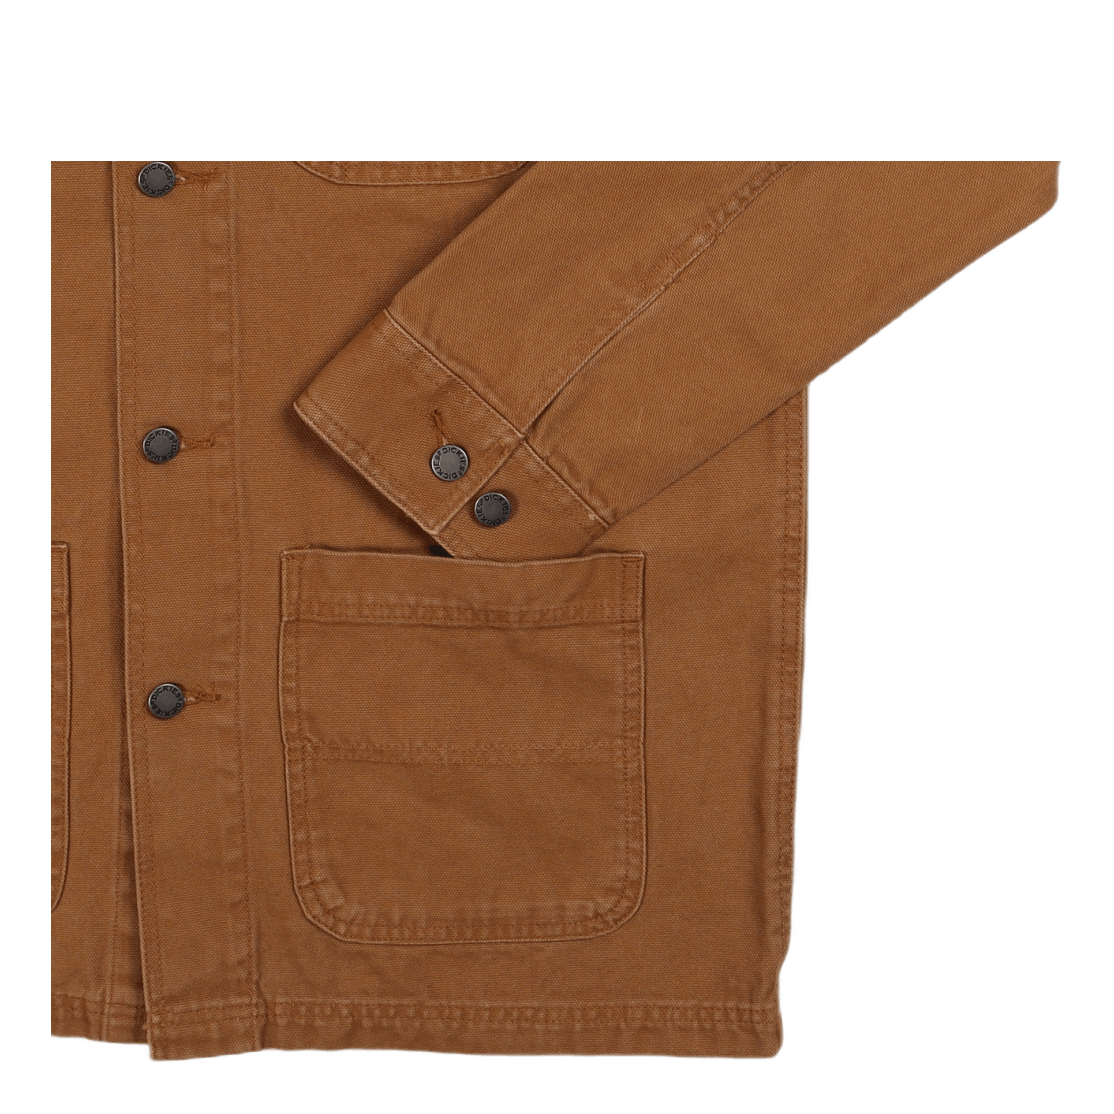 Duck Lined Chore Jacket Stone Washed Brown Duck